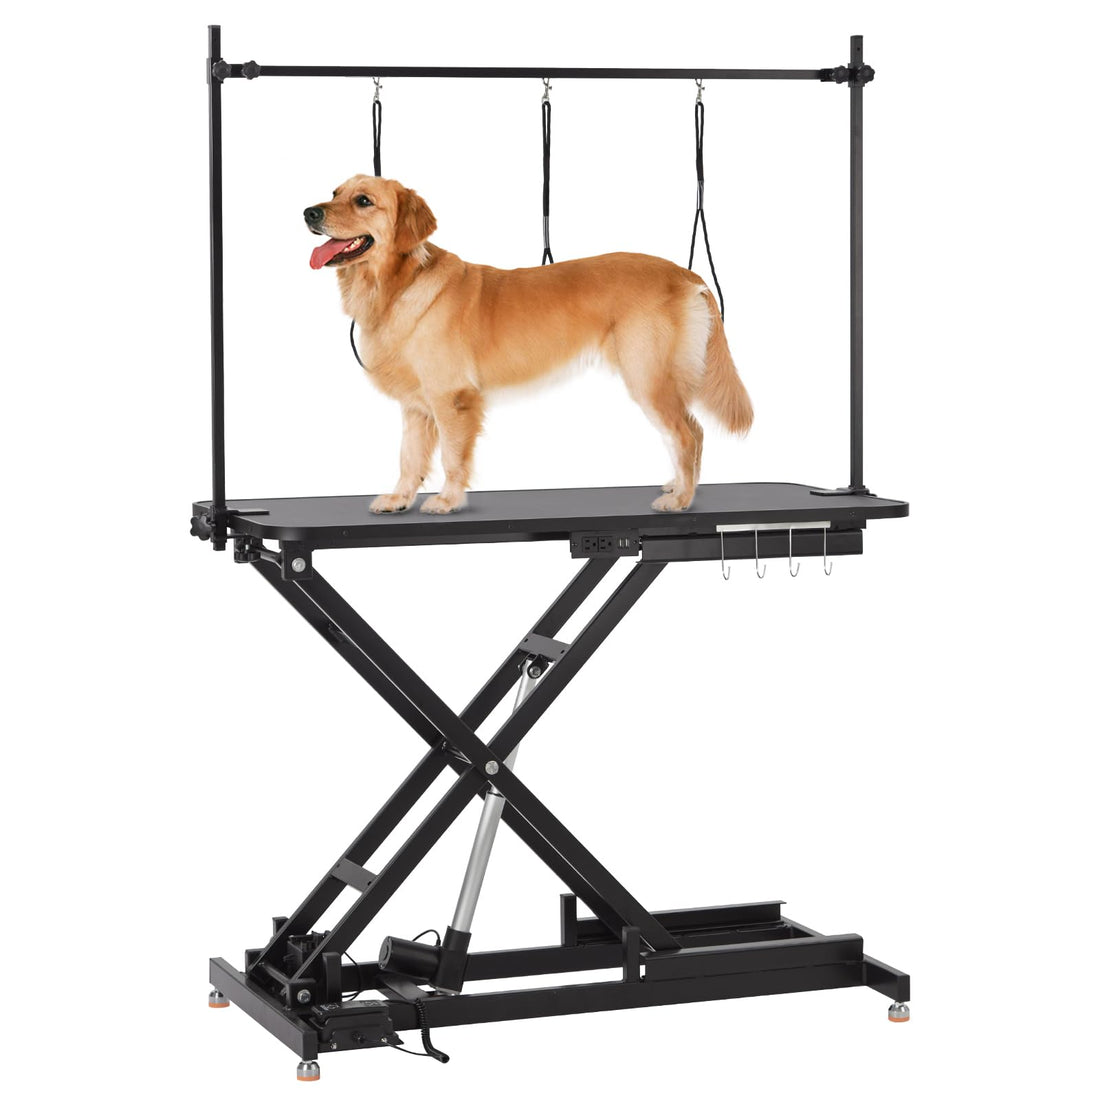 Heavy Duty Electric Lift Grooming Table for Large Dogs